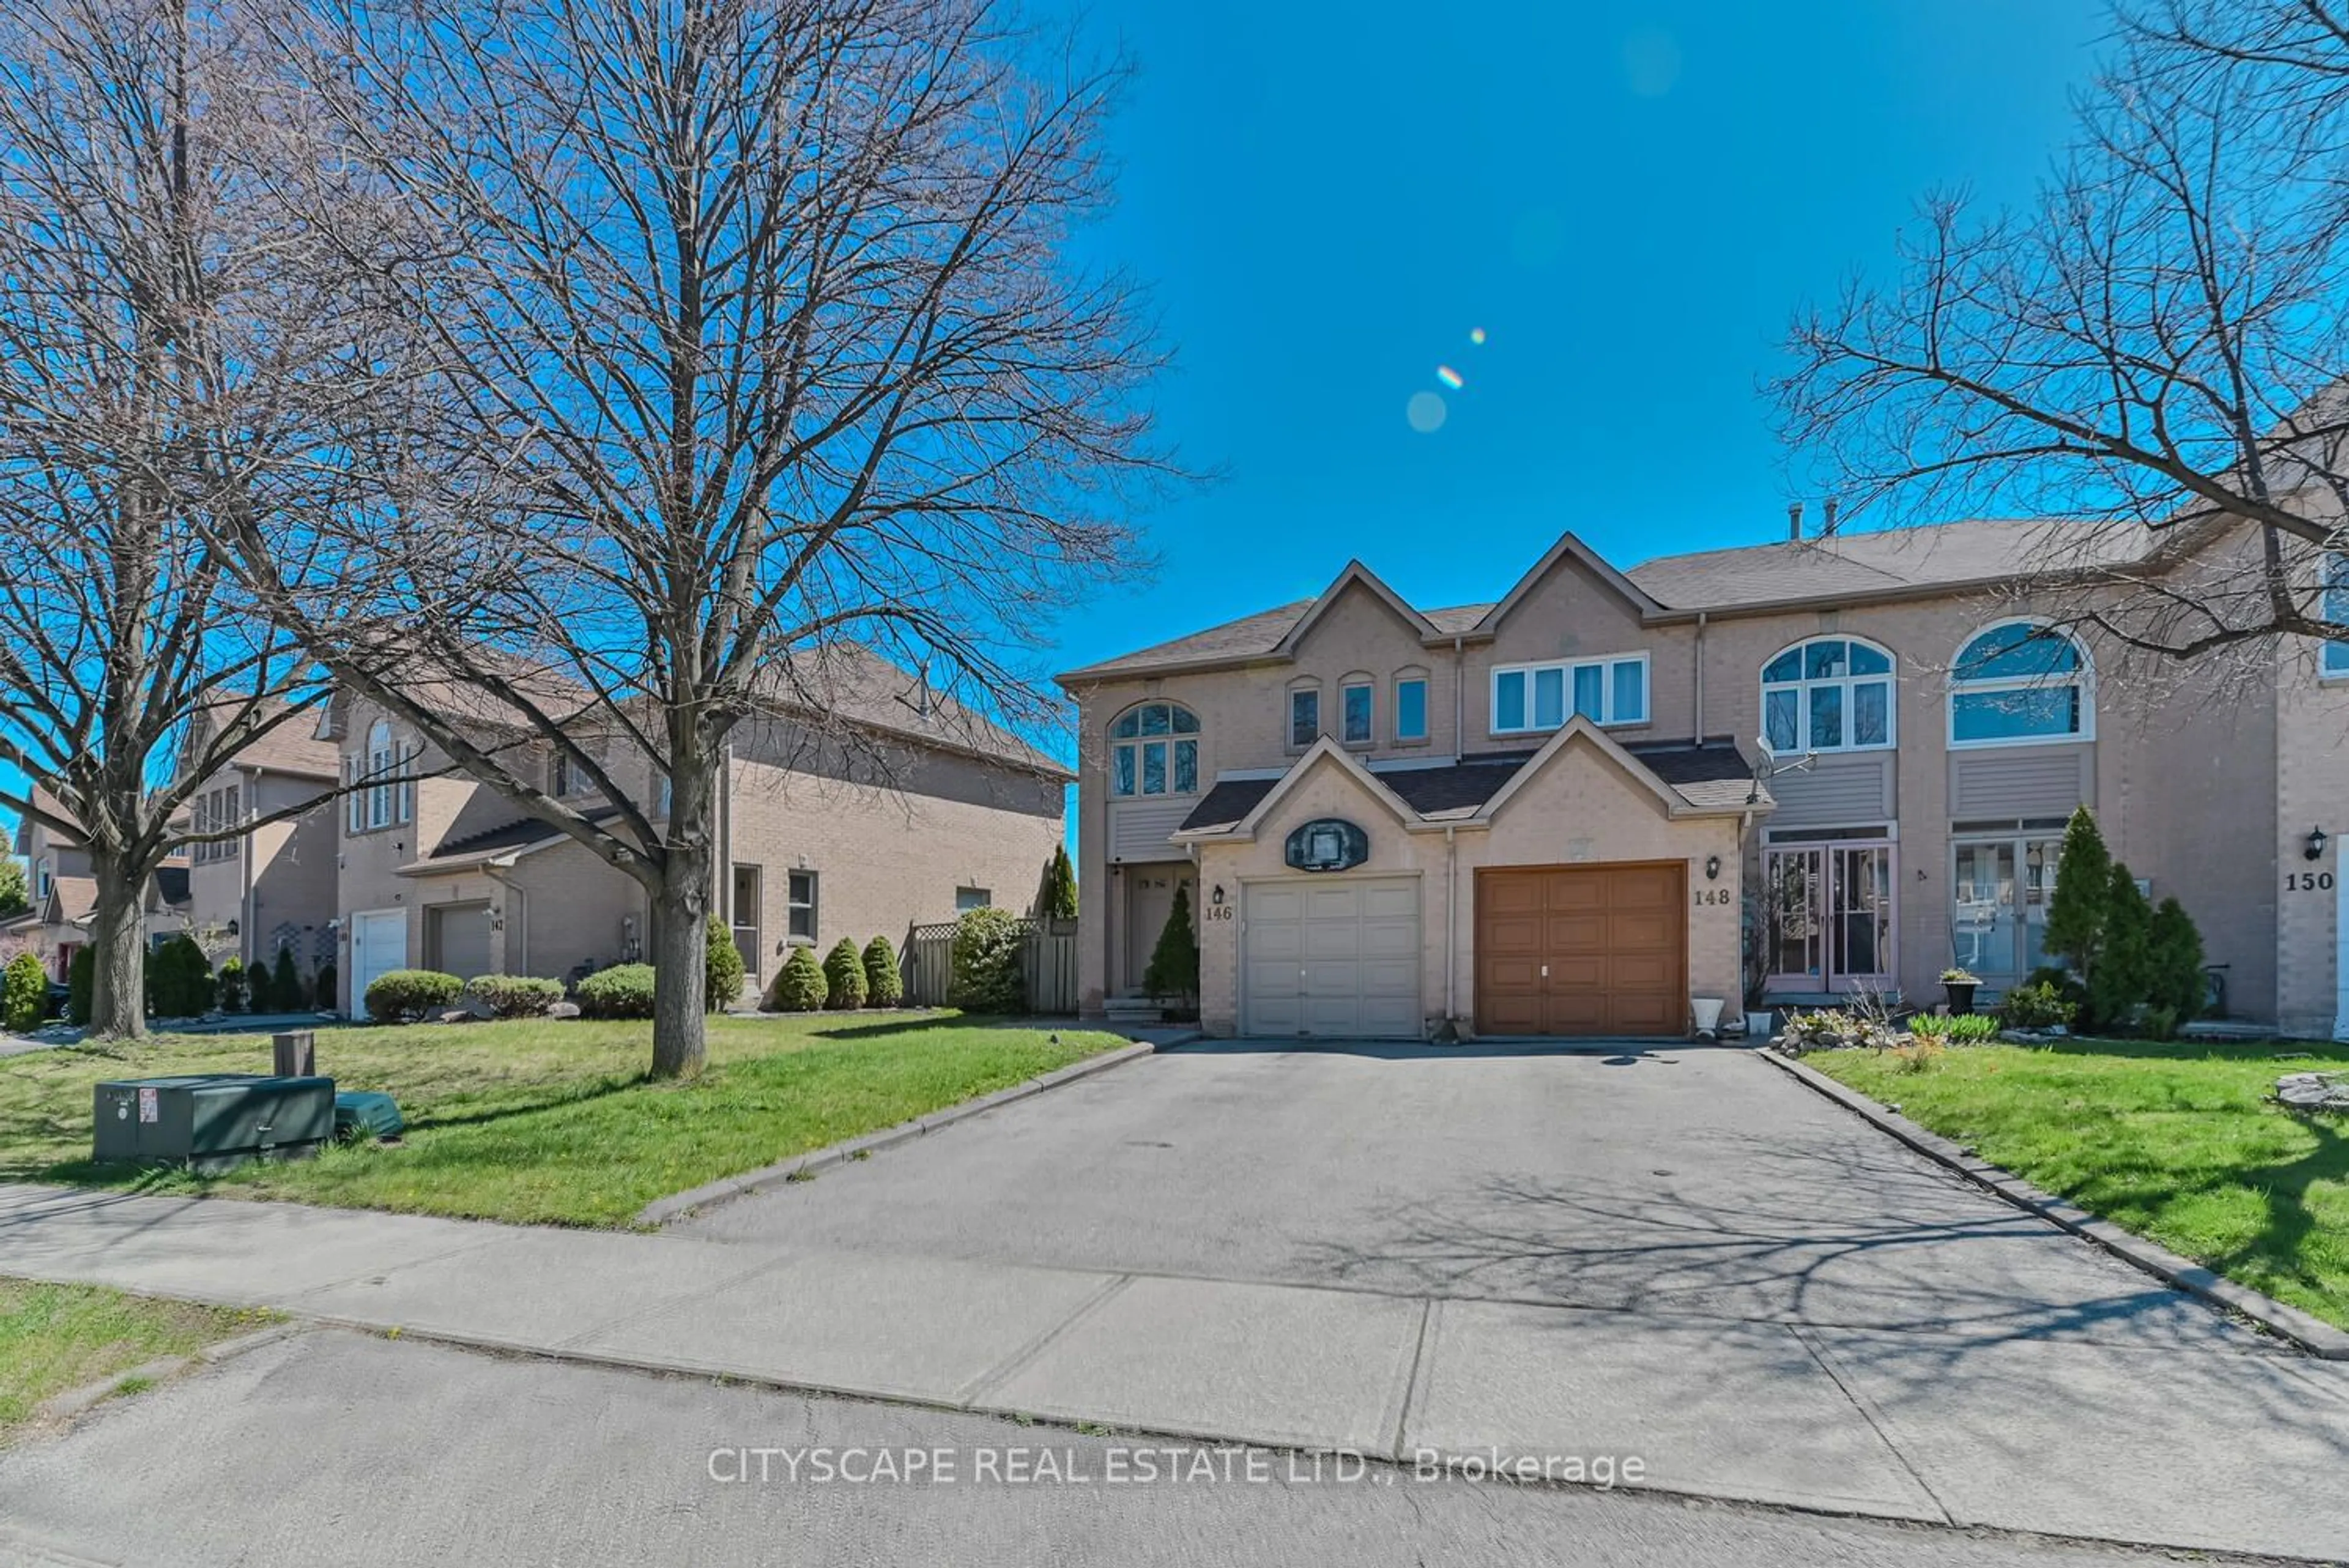 A pic from exterior of the house or condo for 146 Richwood Cres, Brampton Ontario L6X 4K6